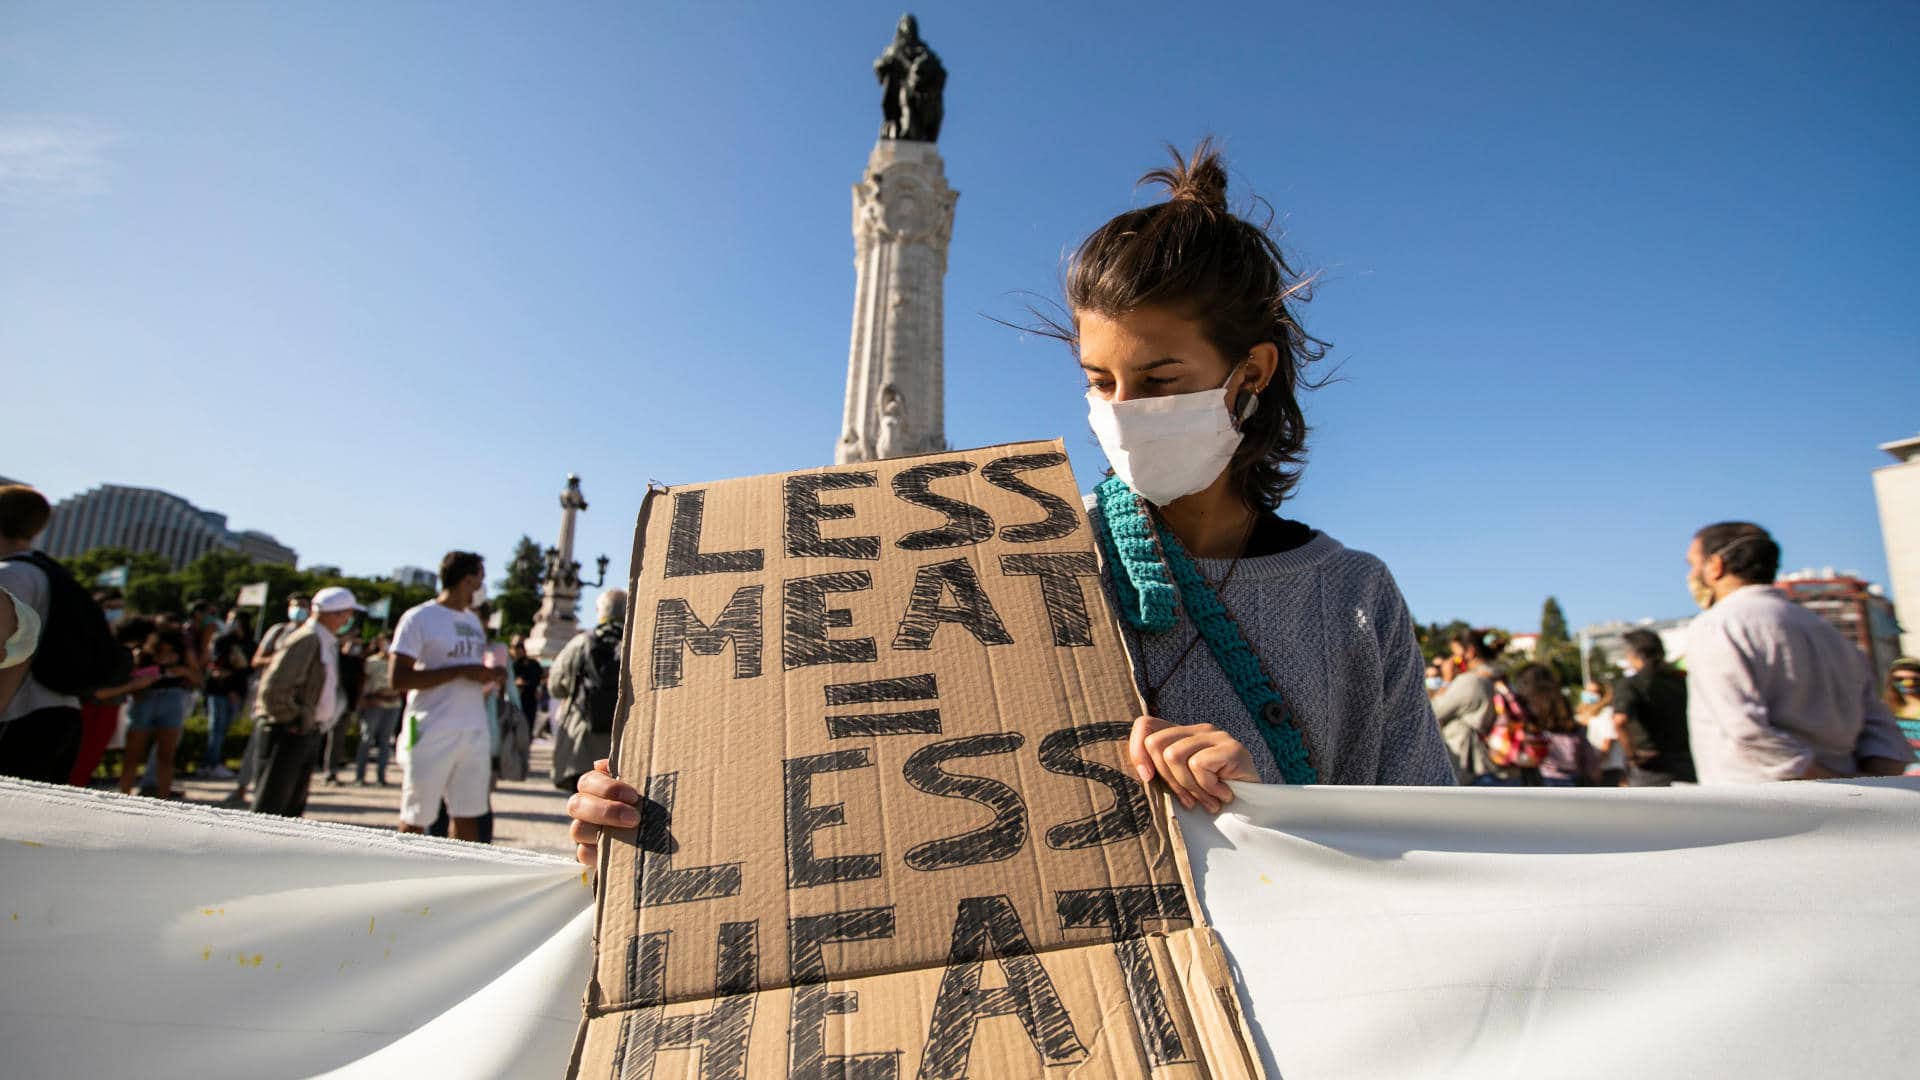 Portuguese students joined the international movement Fridays for Future in Lisbon to protest against the climate situation amid the Covid-19 pandemic in Sept. 2020.